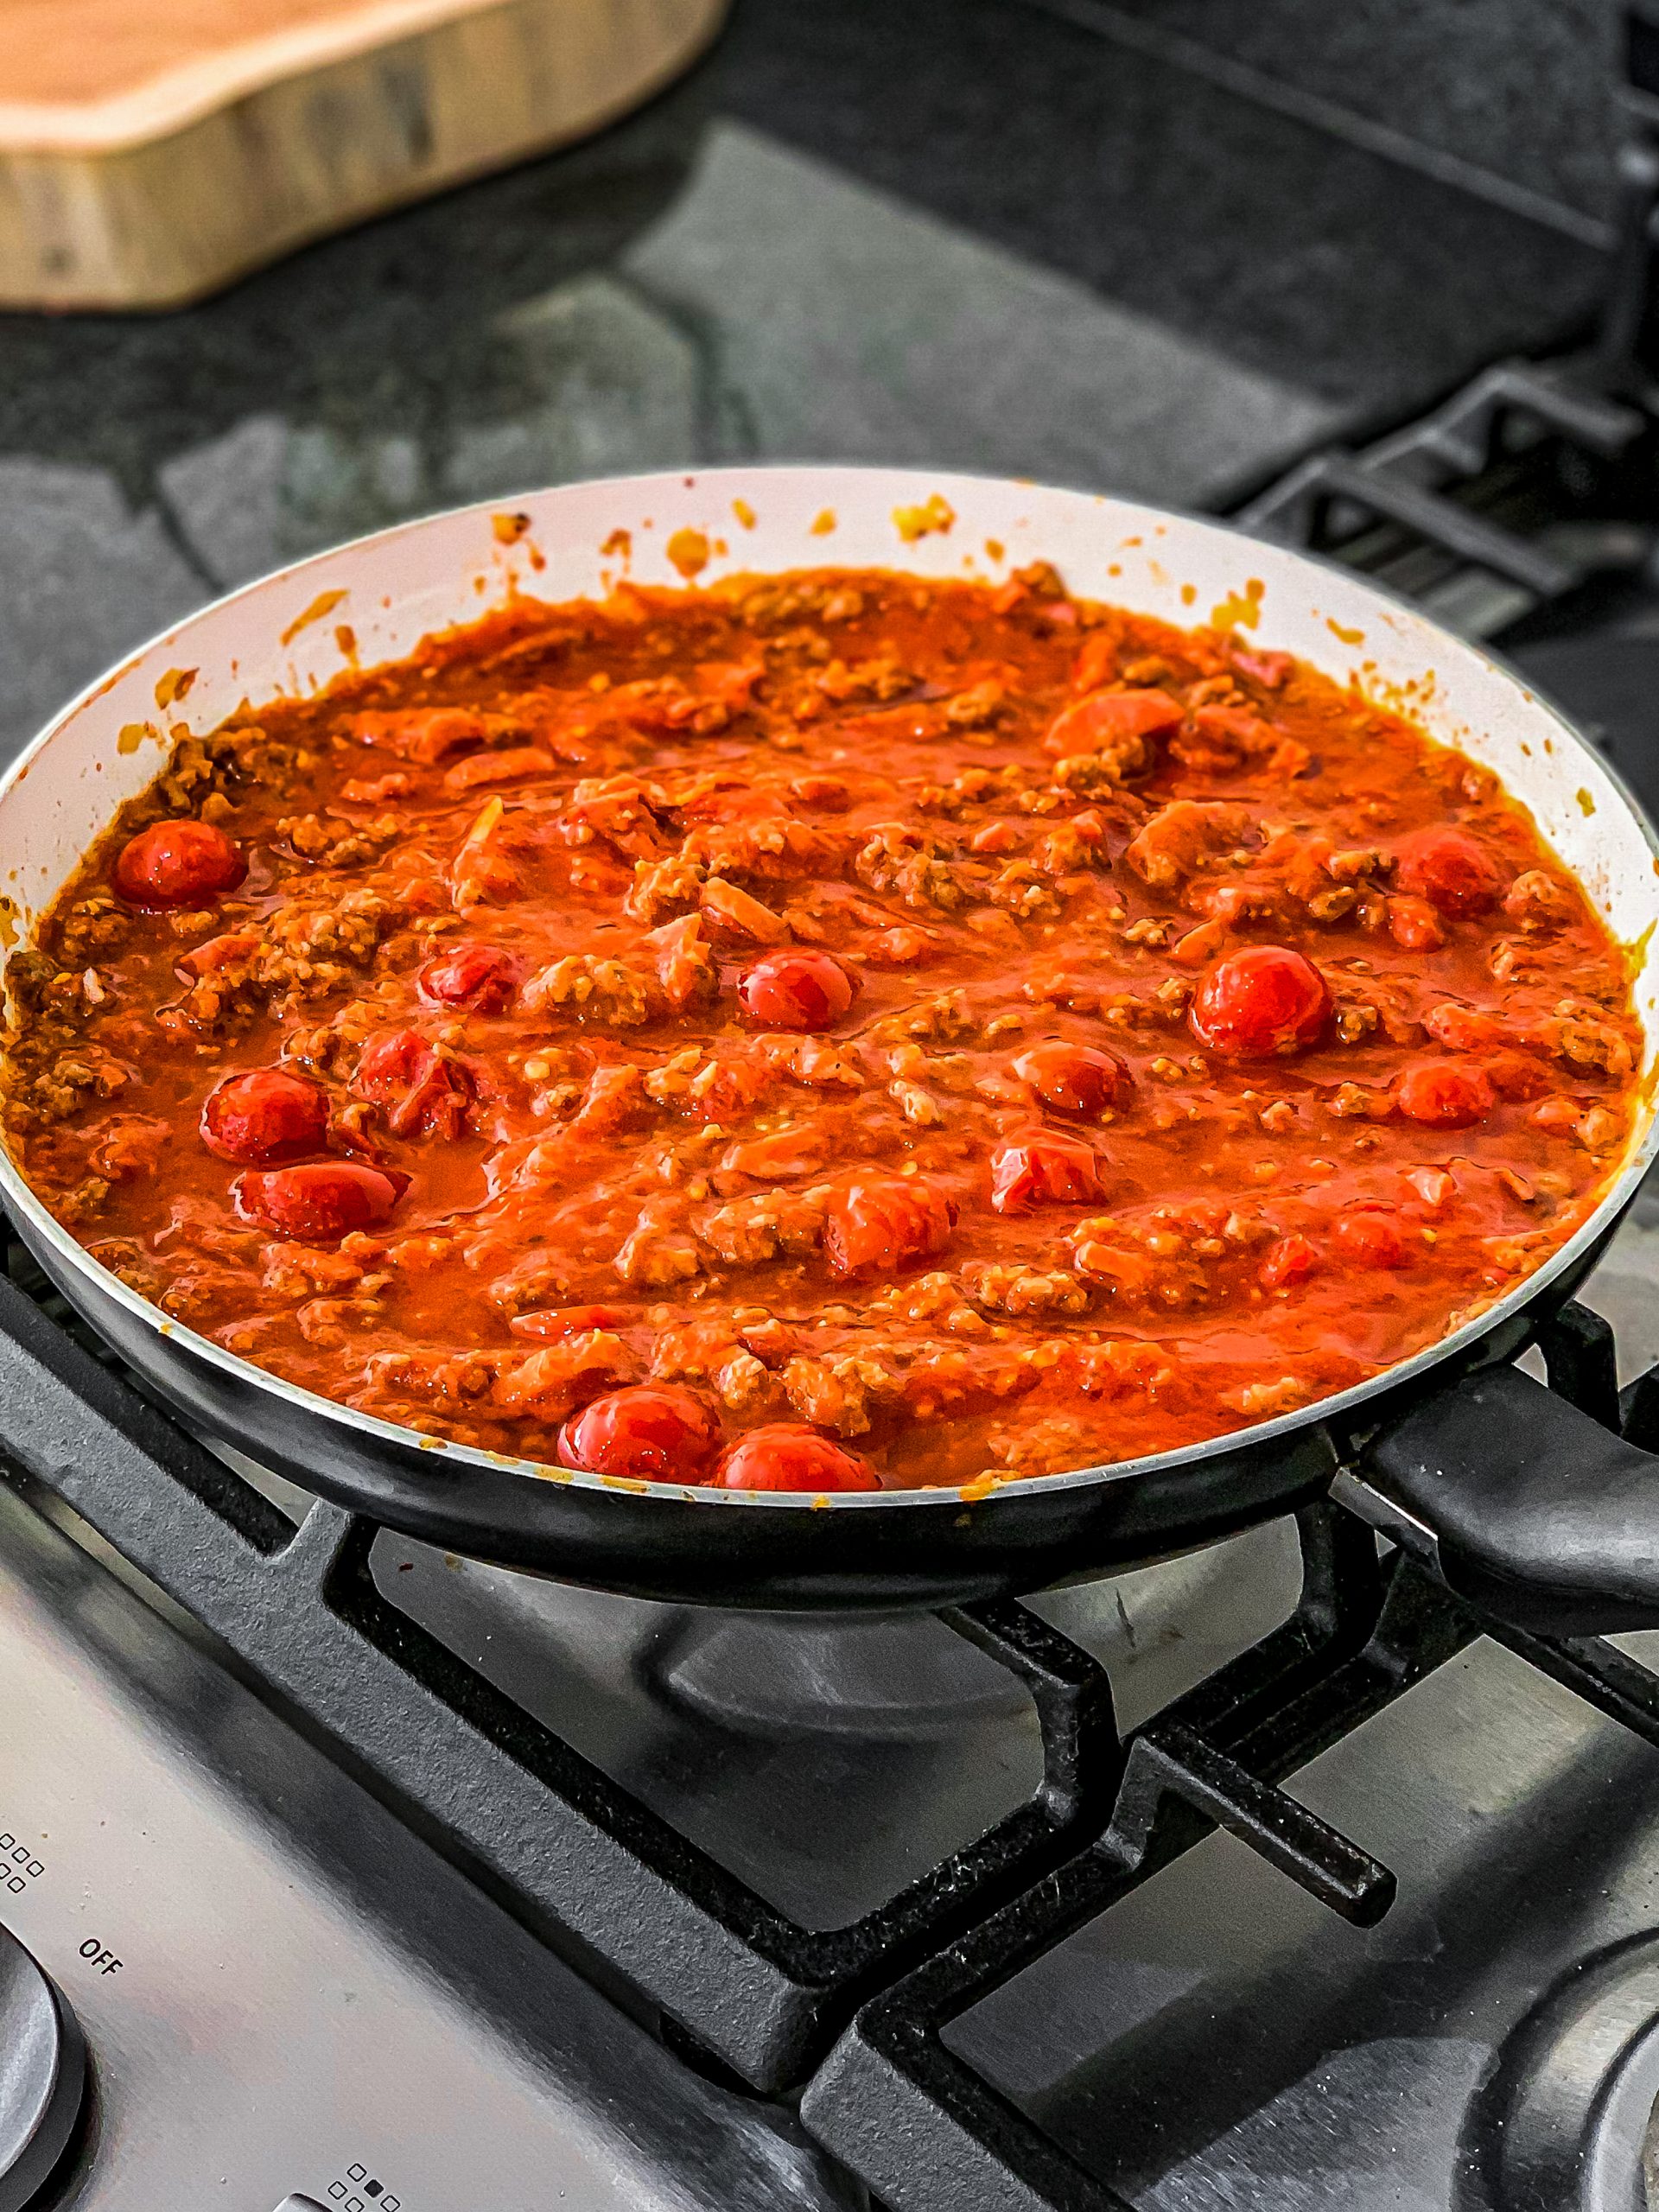 Remove the meat from the pan and add the garlic, the tomatoes in the juice can, and the tomato sauce to it. Stir very well.